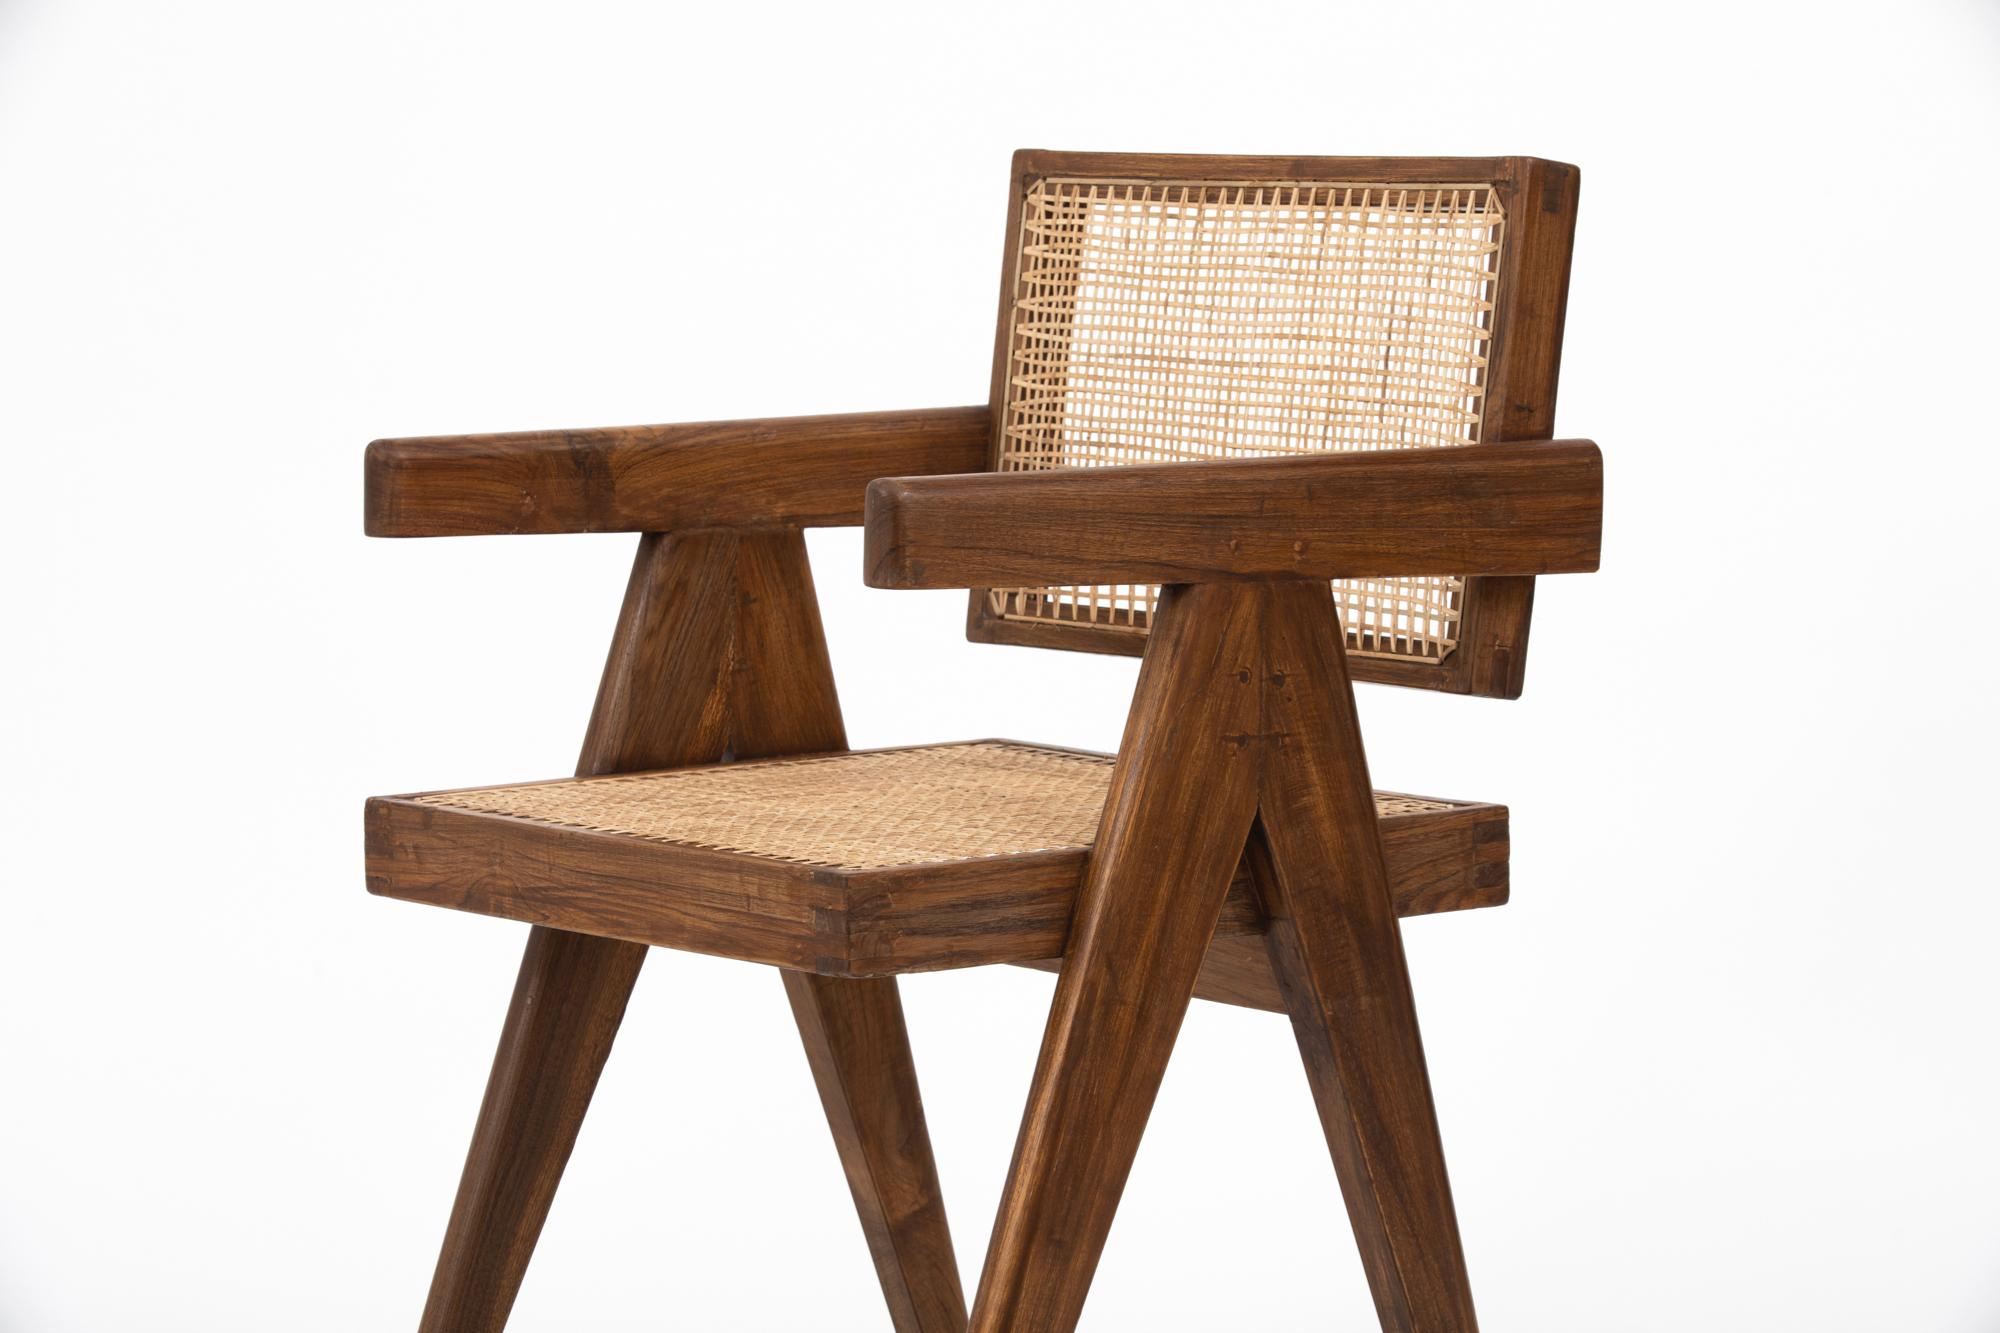 Designed by Pierre Jeanneret, this original teak and wicker floating back armchair with cushions was made for the famous Modernist capital city of Chandigarh, India, which was designed under the direction of Le Corbusier, Jeanneret, and their team.